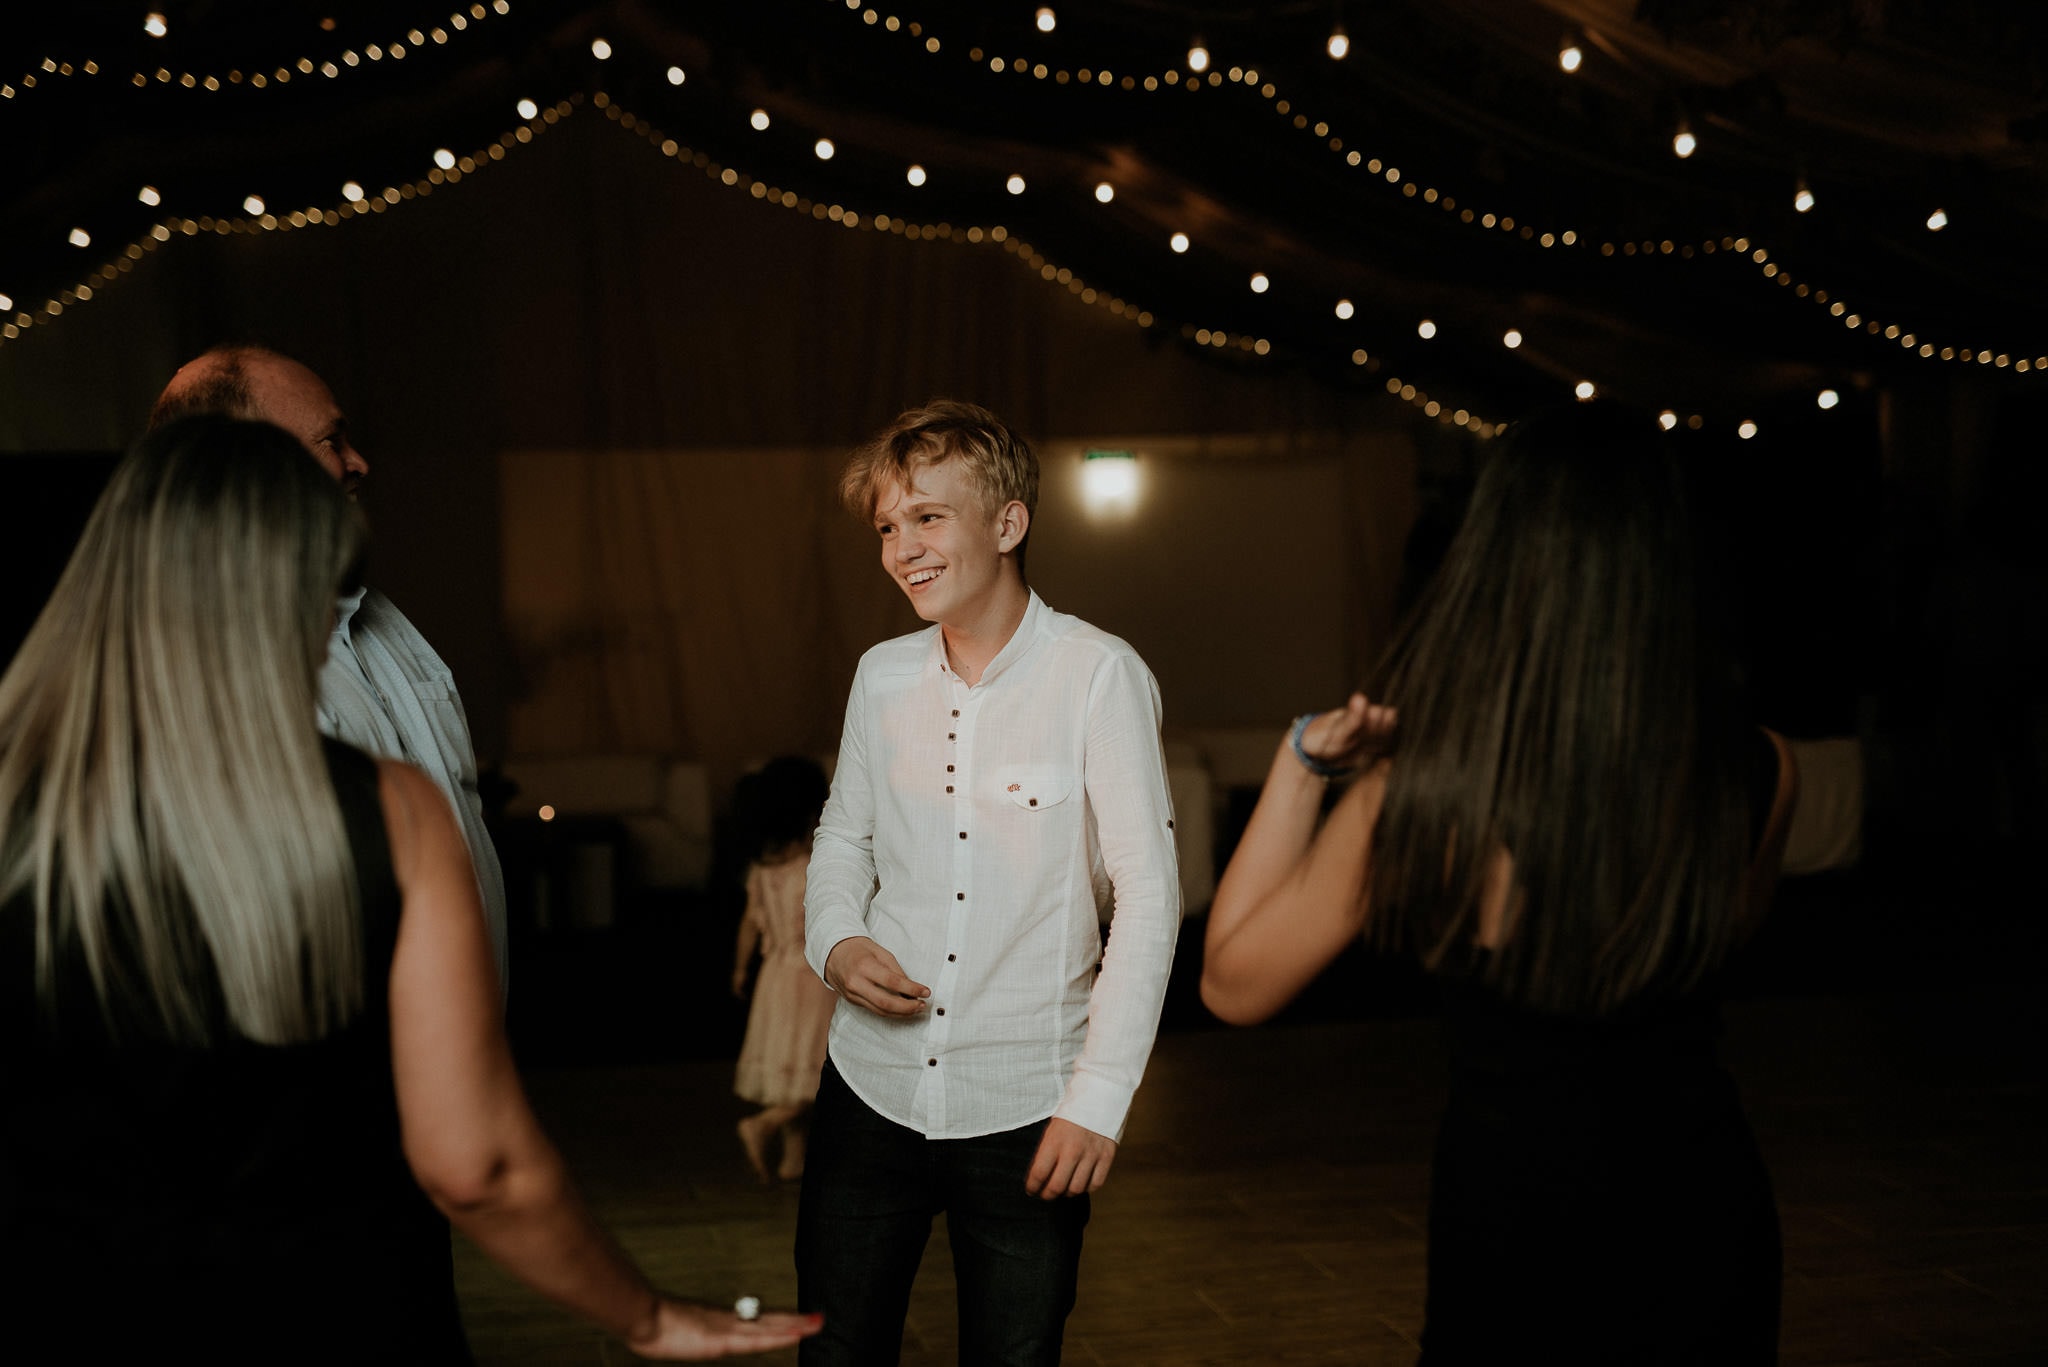 young wedding guest on the dancing floor